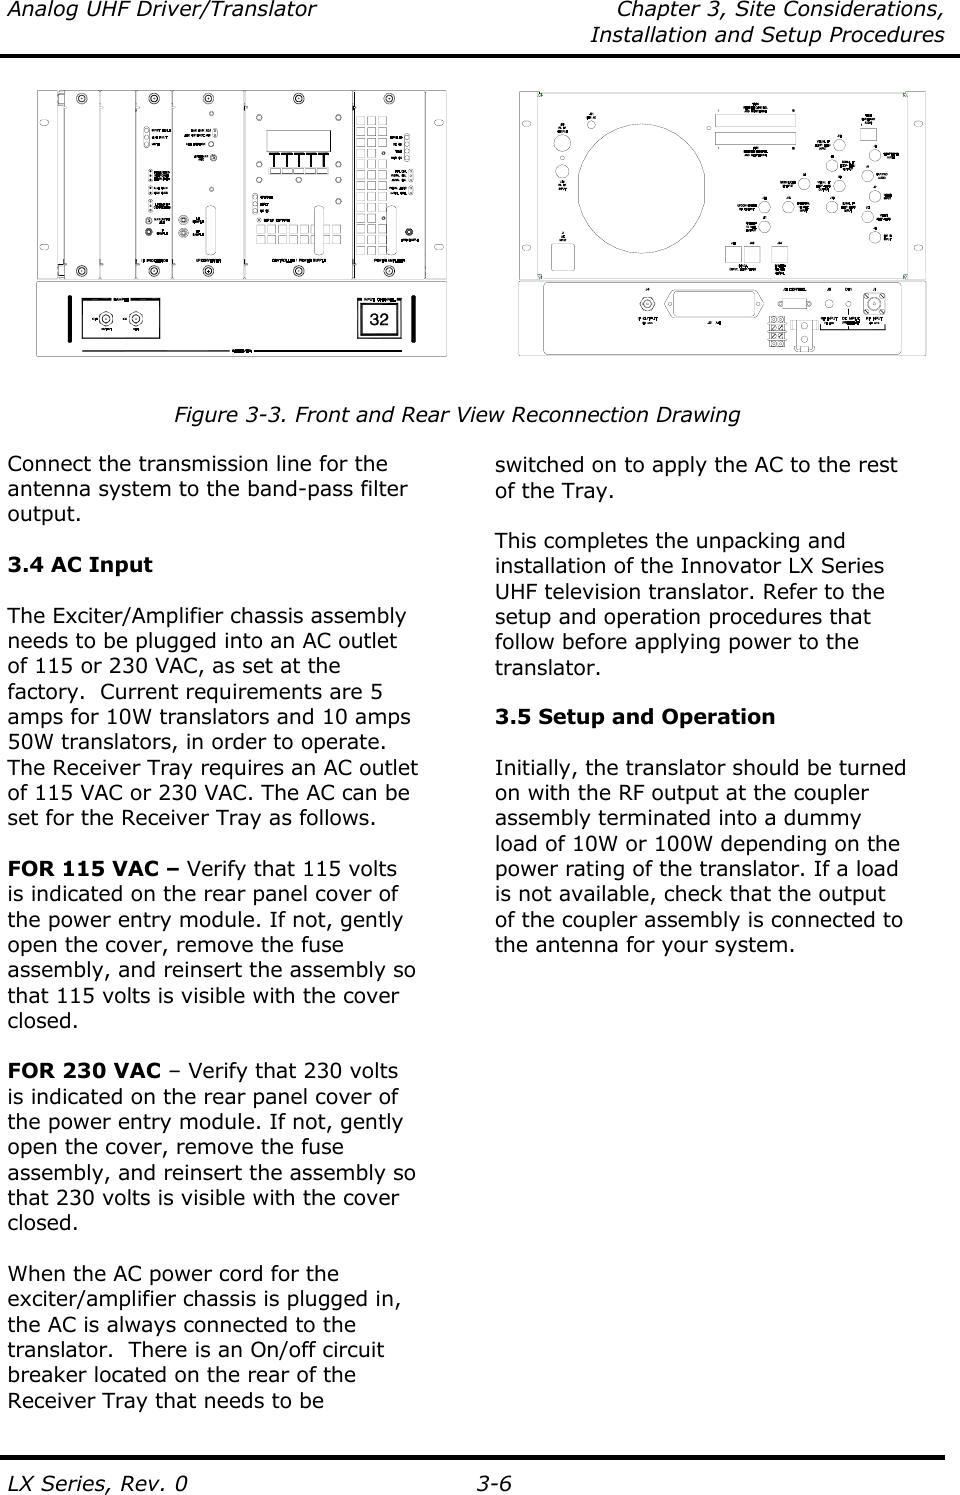 Analog UHF Driver/Translator  Chapter 3, Site Considerations,    Installation and Setup Procedures  LX Series, Rev. 0 3-6             Figure 3-3. Front and Rear View Reconnection Drawing  Connect the transmission line for the antenna system to the band-pass filter output.   3.4 AC Input  The Exciter/Amplifier chassis assembly needs to be plugged into an AC outlet of 115 or 230 VAC, as set at the factory.  Current requirements are 5 amps for 10W translators and 10 amps 50W translators, in order to operate.  The Receiver Tray requires an AC outlet of 115 VAC or 230 VAC. The AC can be set for the Receiver Tray as follows.  FOR 115 VAC – Verify that 115 volts is indicated on the rear panel cover of the power entry module. If not, gently open the cover, remove the fuse assembly, and reinsert the assembly so that 115 volts is visible with the cover closed.  FOR 230 VAC – Verify that 230 volts is indicated on the rear panel cover of the power entry module. If not, gently open the cover, remove the fuse assembly, and reinsert the assembly so that 230 volts is visible with the cover closed.  When the AC power cord for the exciter/amplifier chassis is plugged in, the AC is always connected to the translator.  There is an On/off circuit  breaker located on the rear of the  Receiver Tray that needs to be    switched on to apply the AC to the rest of the Tray.  This completes the unpacking and installation of the Innovator LX Series UHF television translator. Refer to the setup and operation procedures that follow before applying power to the translator.  3.5 Setup and Operation  Initially, the translator should be turned on with the RF output at the coupler assembly terminated into a dummy load of 10W or 100W depending on the power rating of the translator. If a load is not available, check that the output of the coupler assembly is connected to the antenna for your system. 